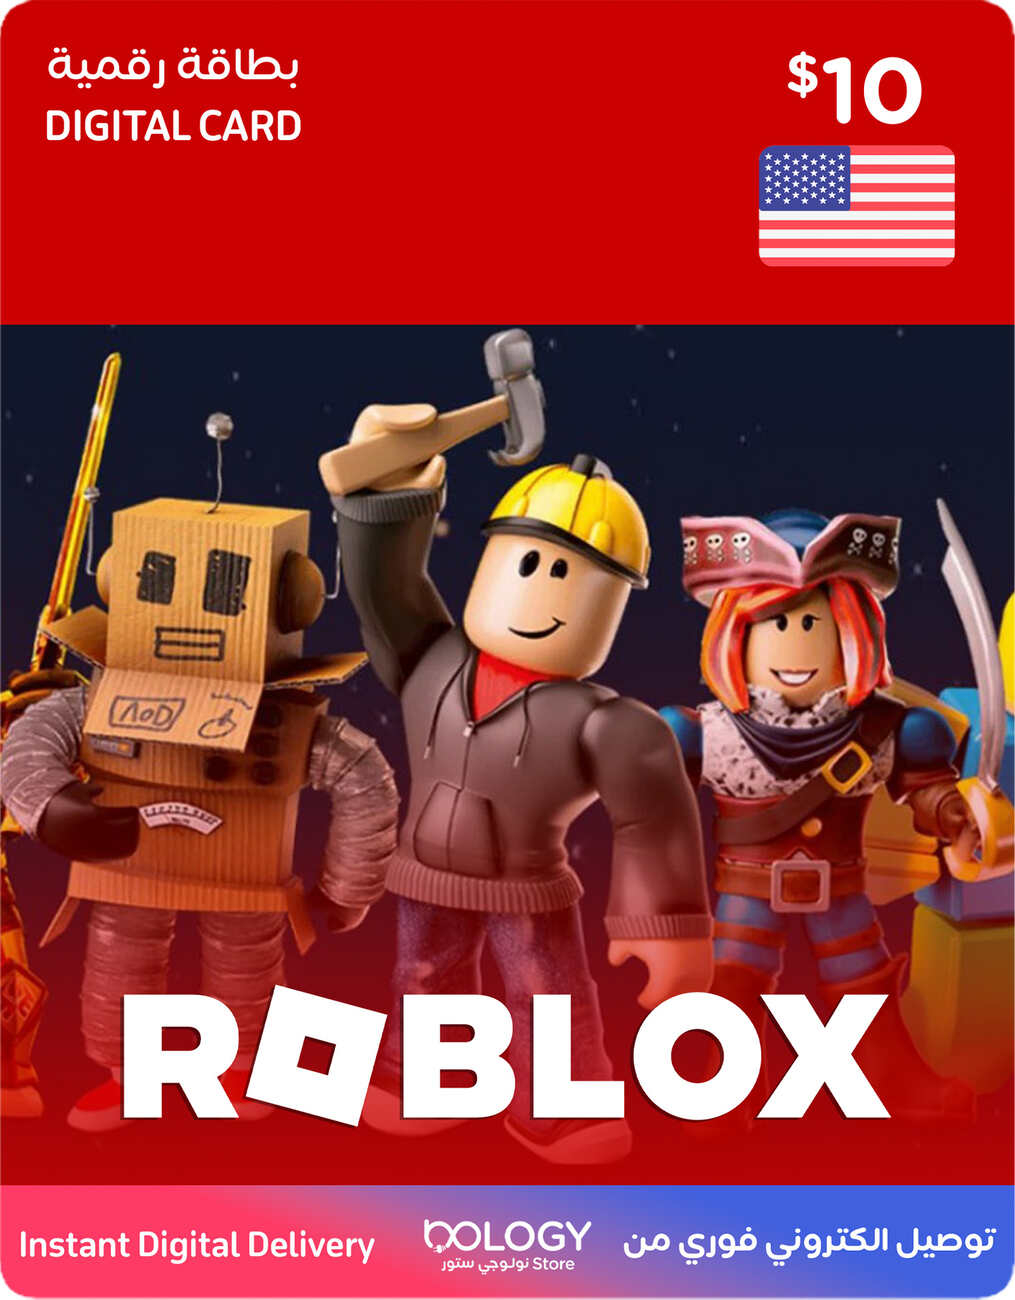 GLOBAL 800 ROBUX / ROBLOX INSTANT DELIVERY - Roblox Gift Cards